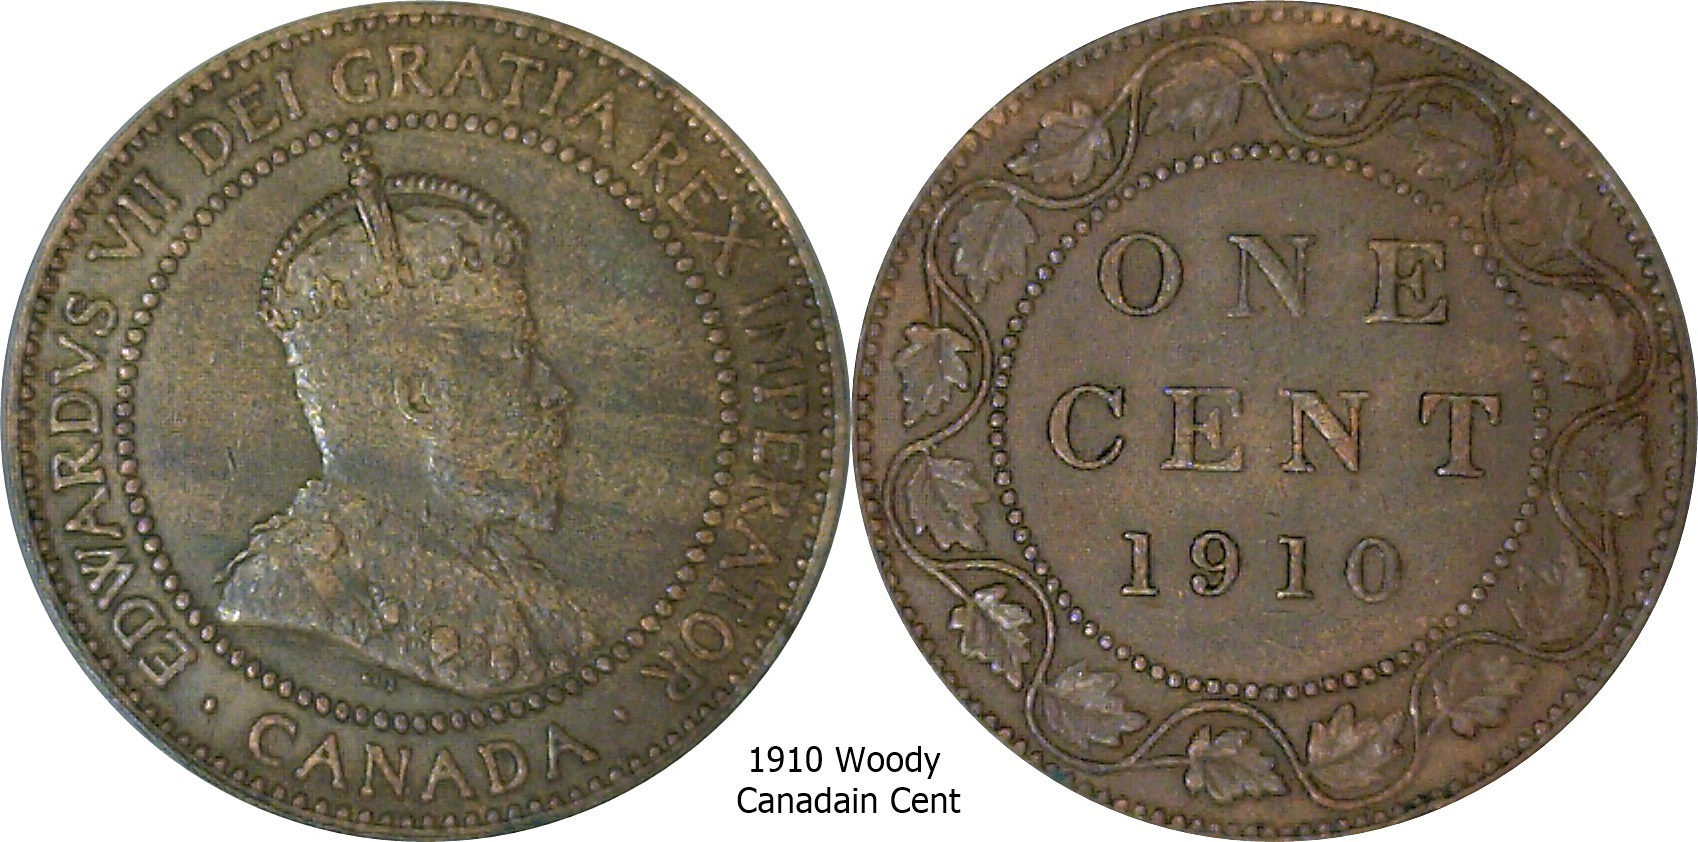 1910 Woody Canadian cent.jpg